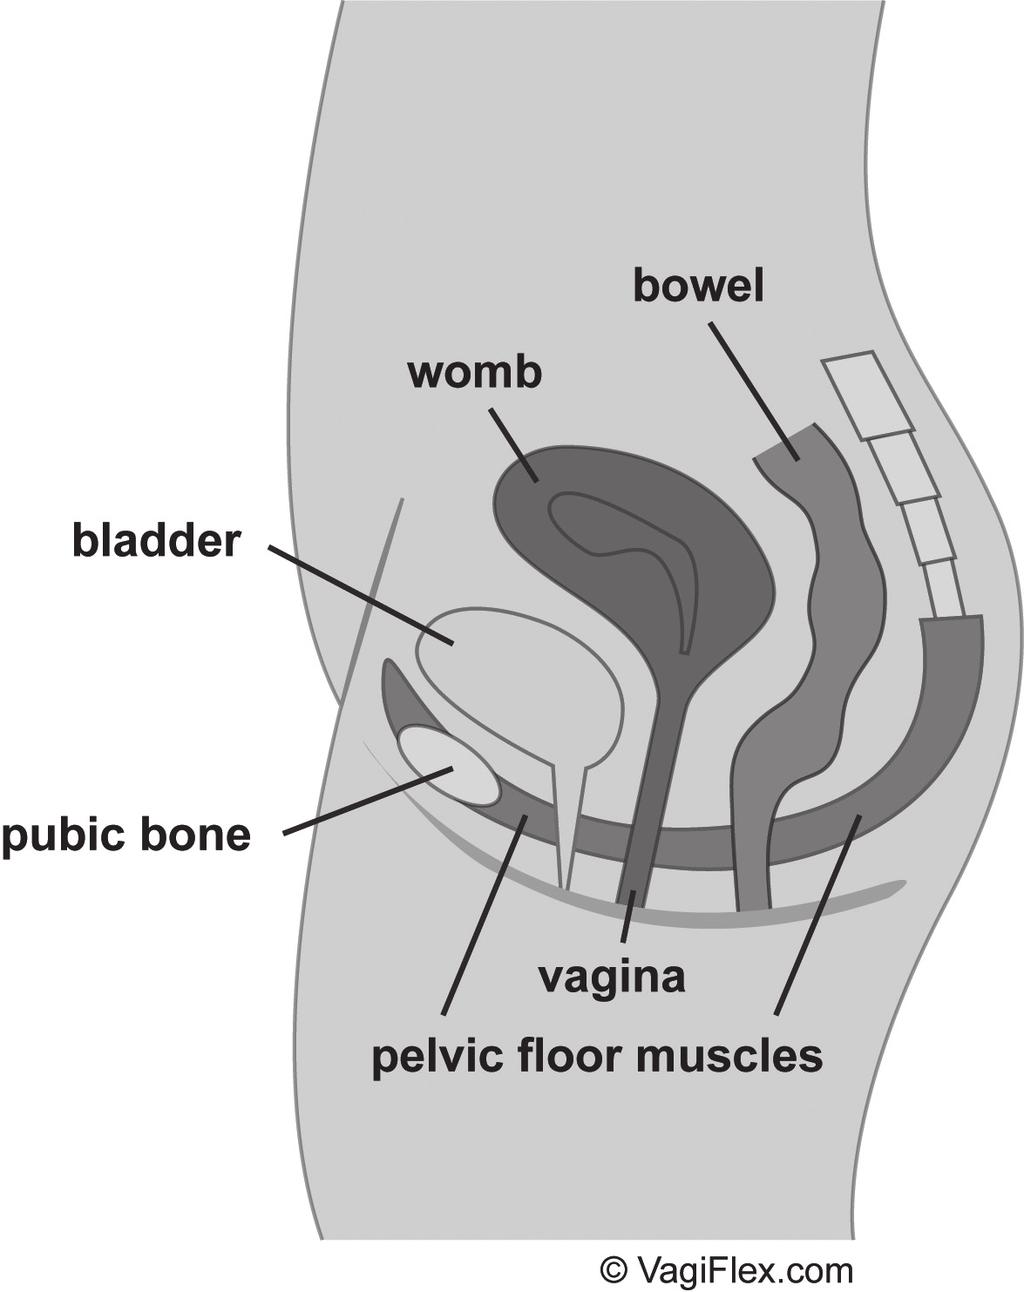 Your pelvic floor muscles need to stay strong and work in the right way at the right time.